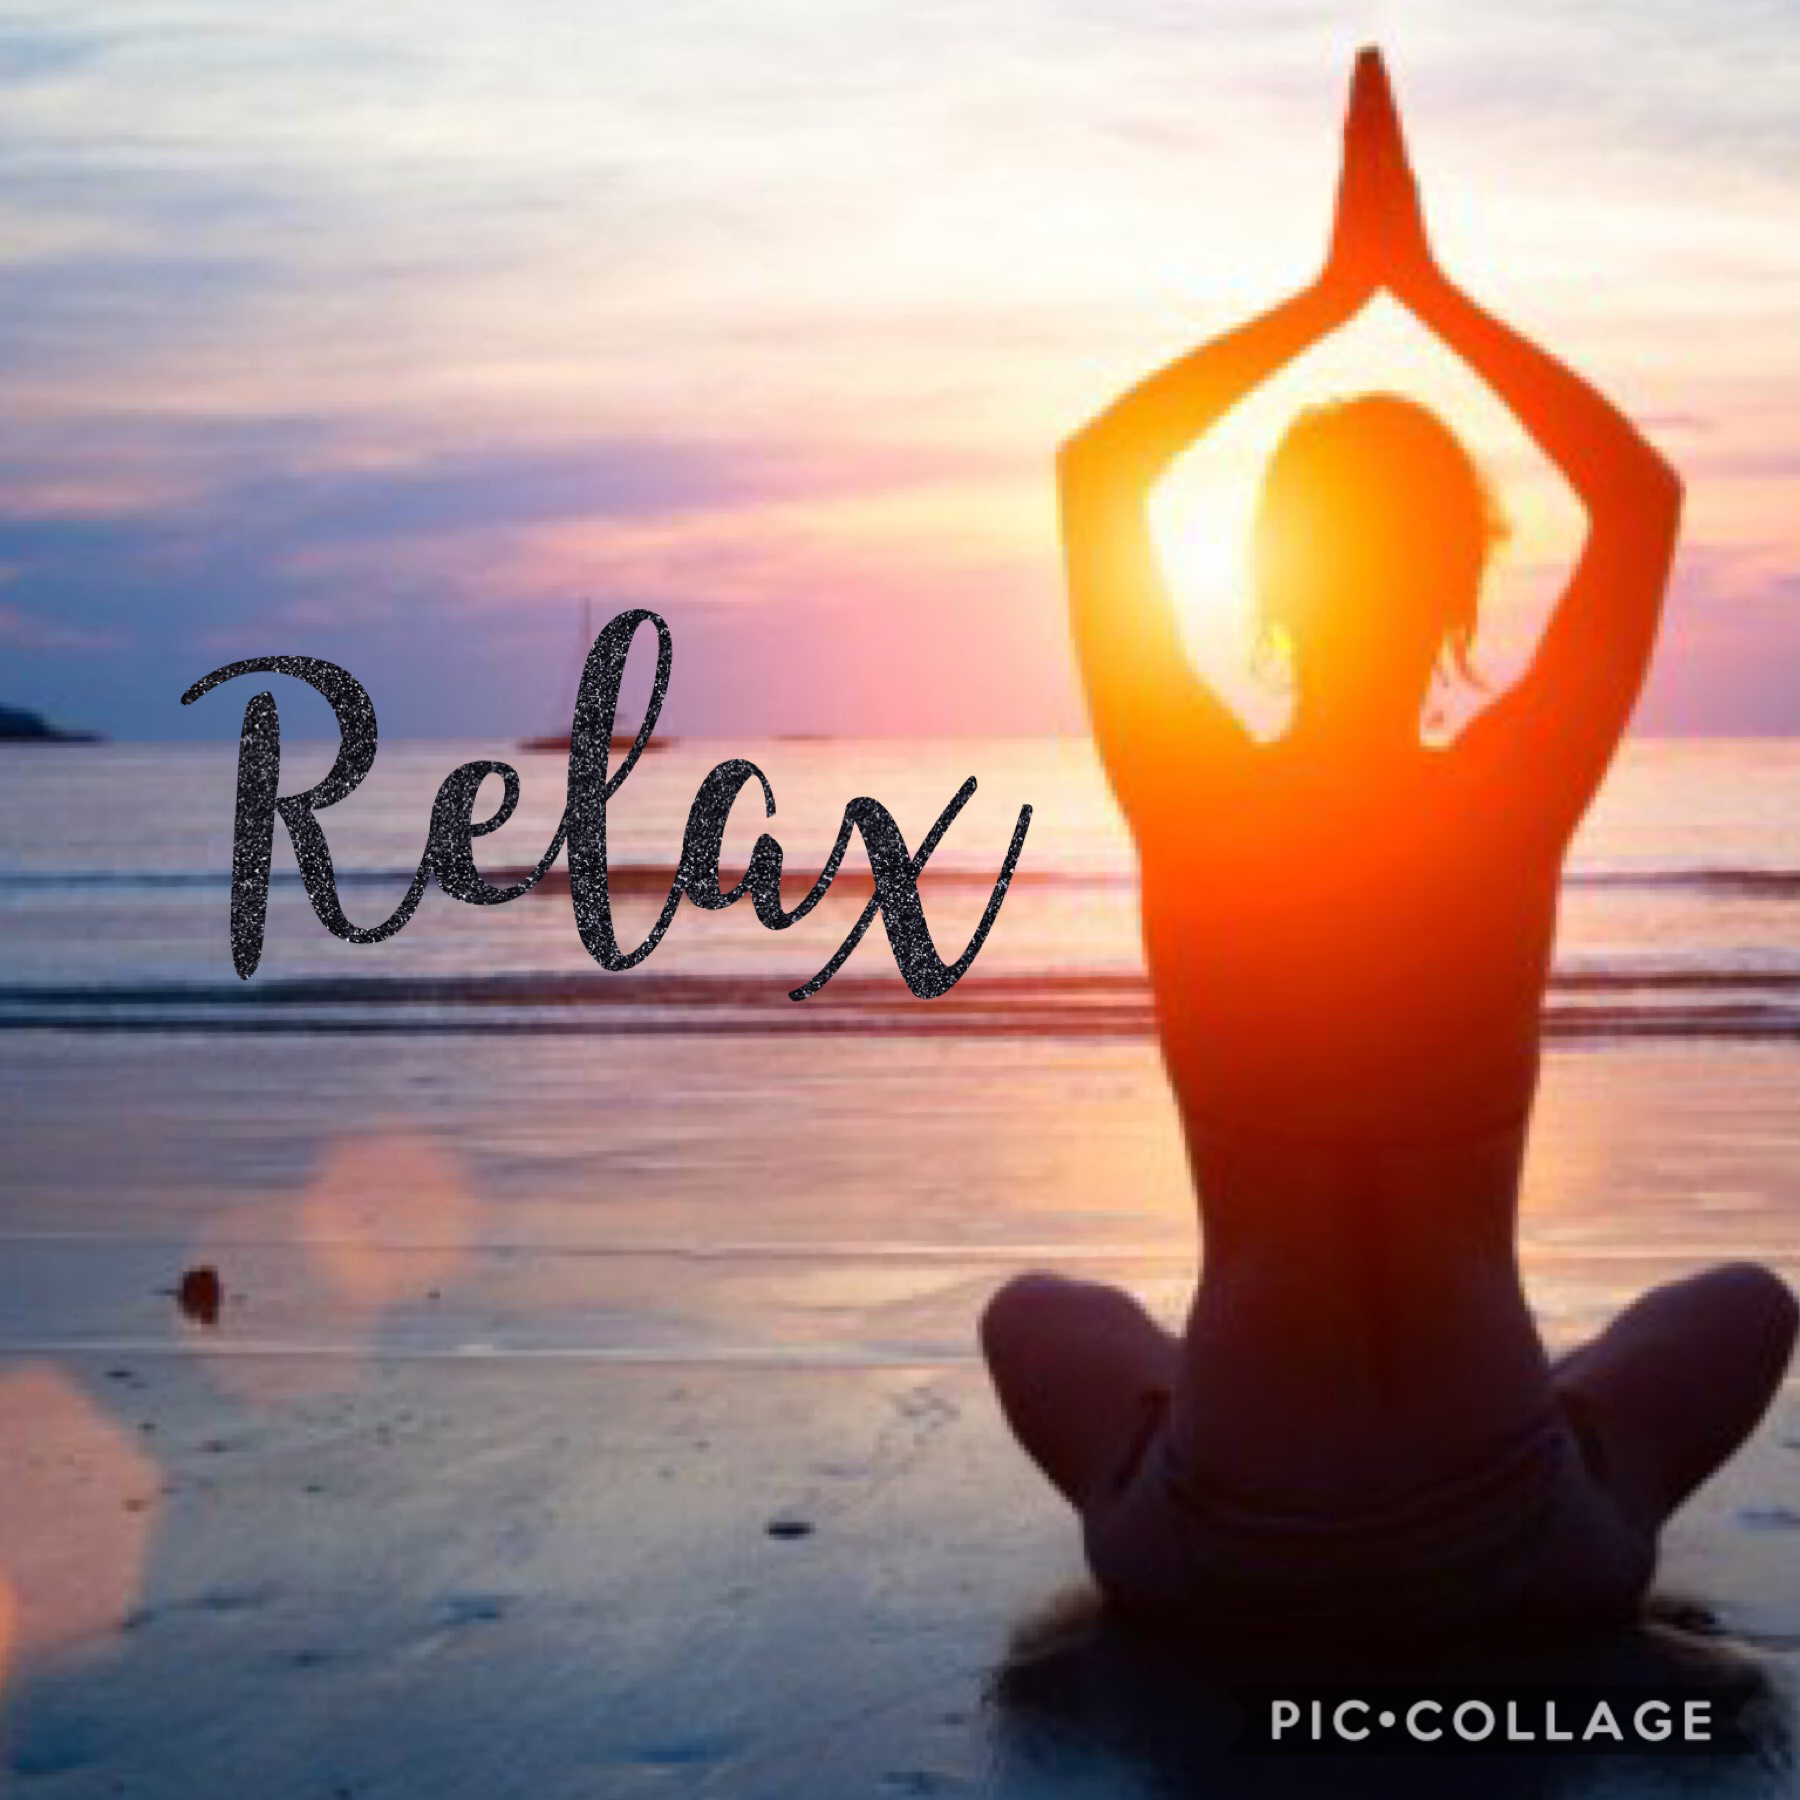 #relax